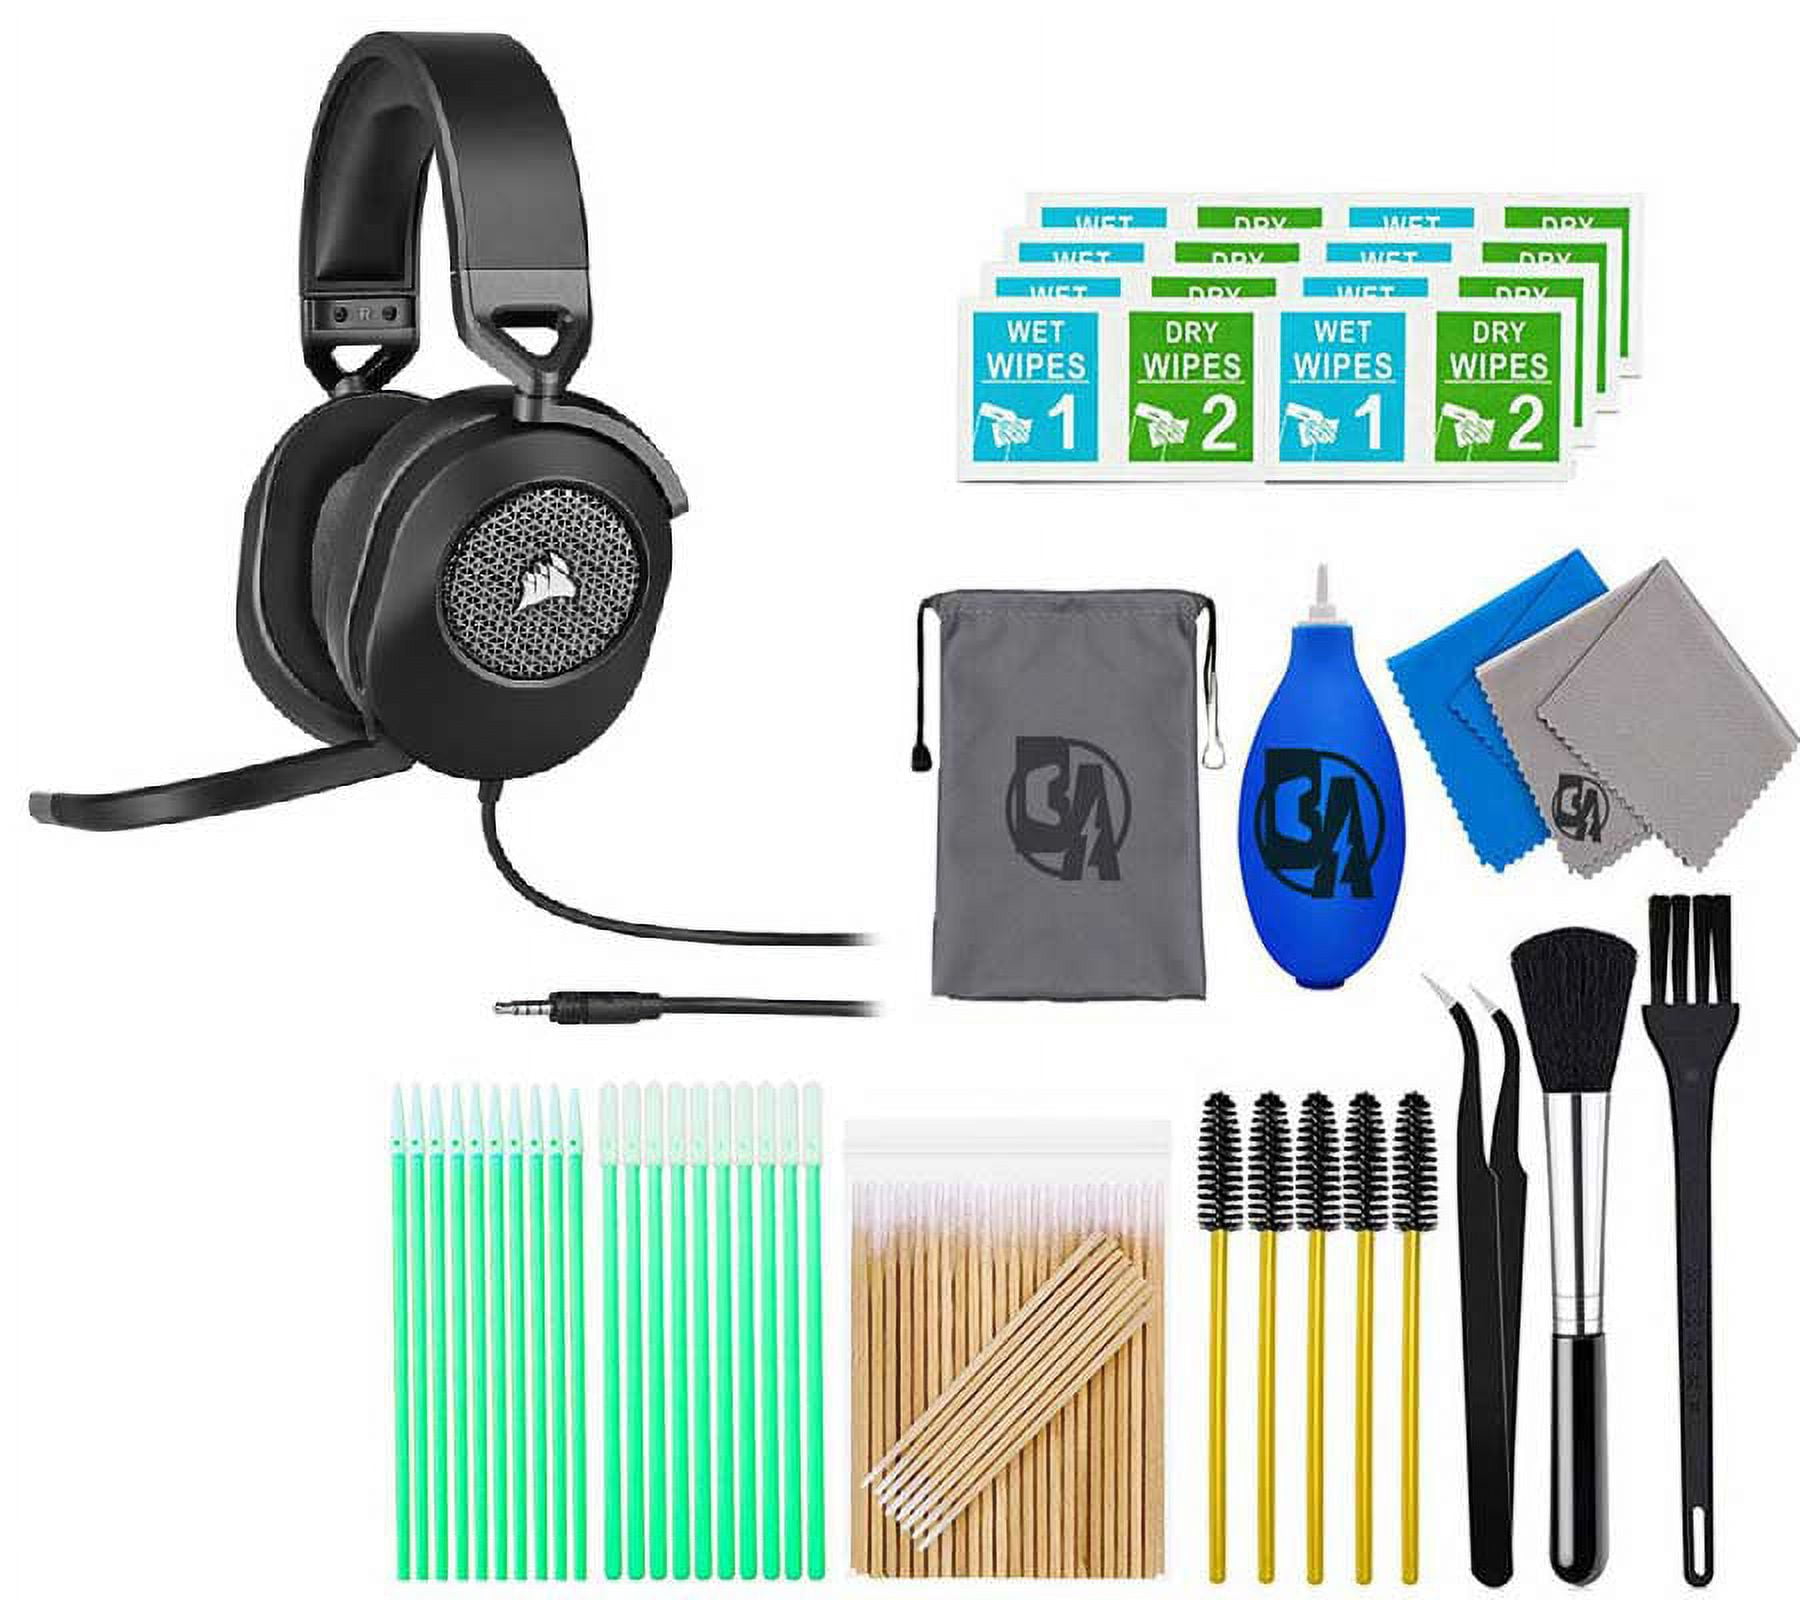 Kit Cleaning Bolt Headset Axtion HS65 With Wired 7.1 Gaming Surround Black CORSAIR Like Bundle SURROUND New